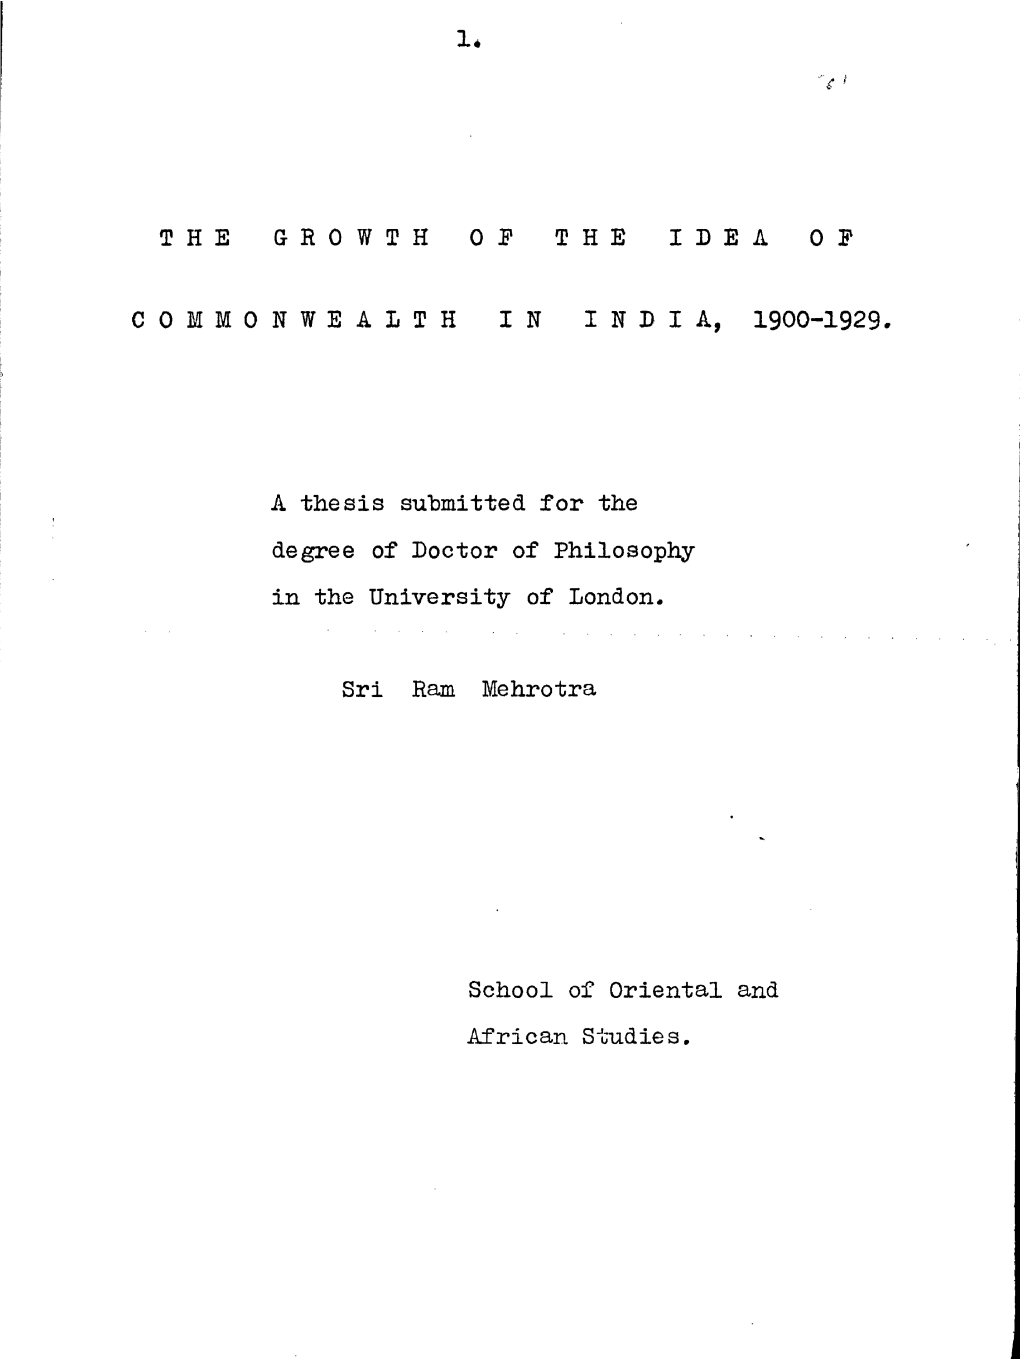 T H E G R O W T H O P T H E I D E a O P C O M M O N W E a L T H I N I N D I a , 1900-1929. a Thesis Submitted for the Degree Of